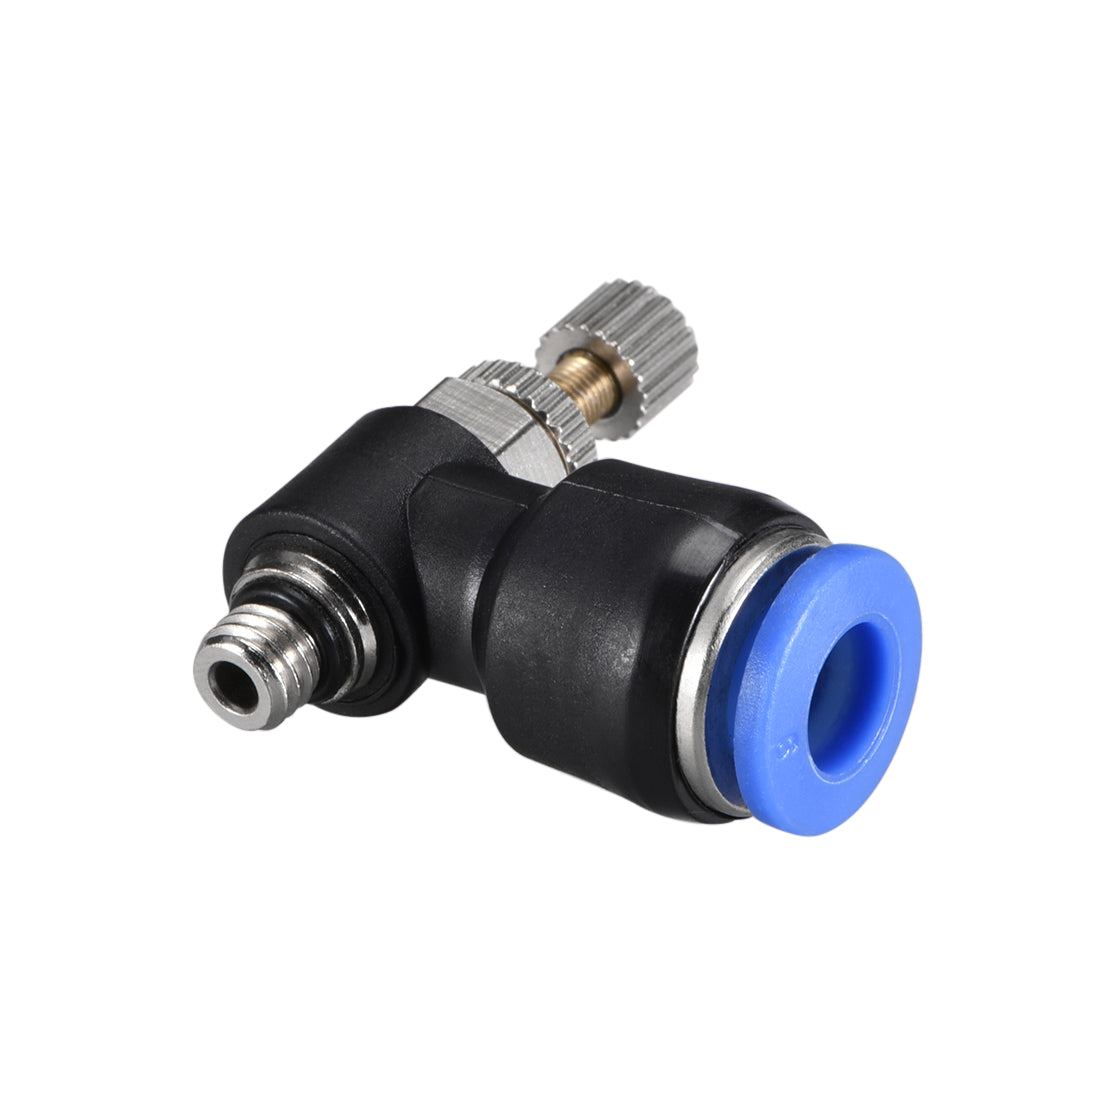 uxcell Uxcell Push-to-Connect Air Flow Control Valve, Elbow, 15/64" Tube OD x M5 Male Thread Speed controller Valve Tube fitting